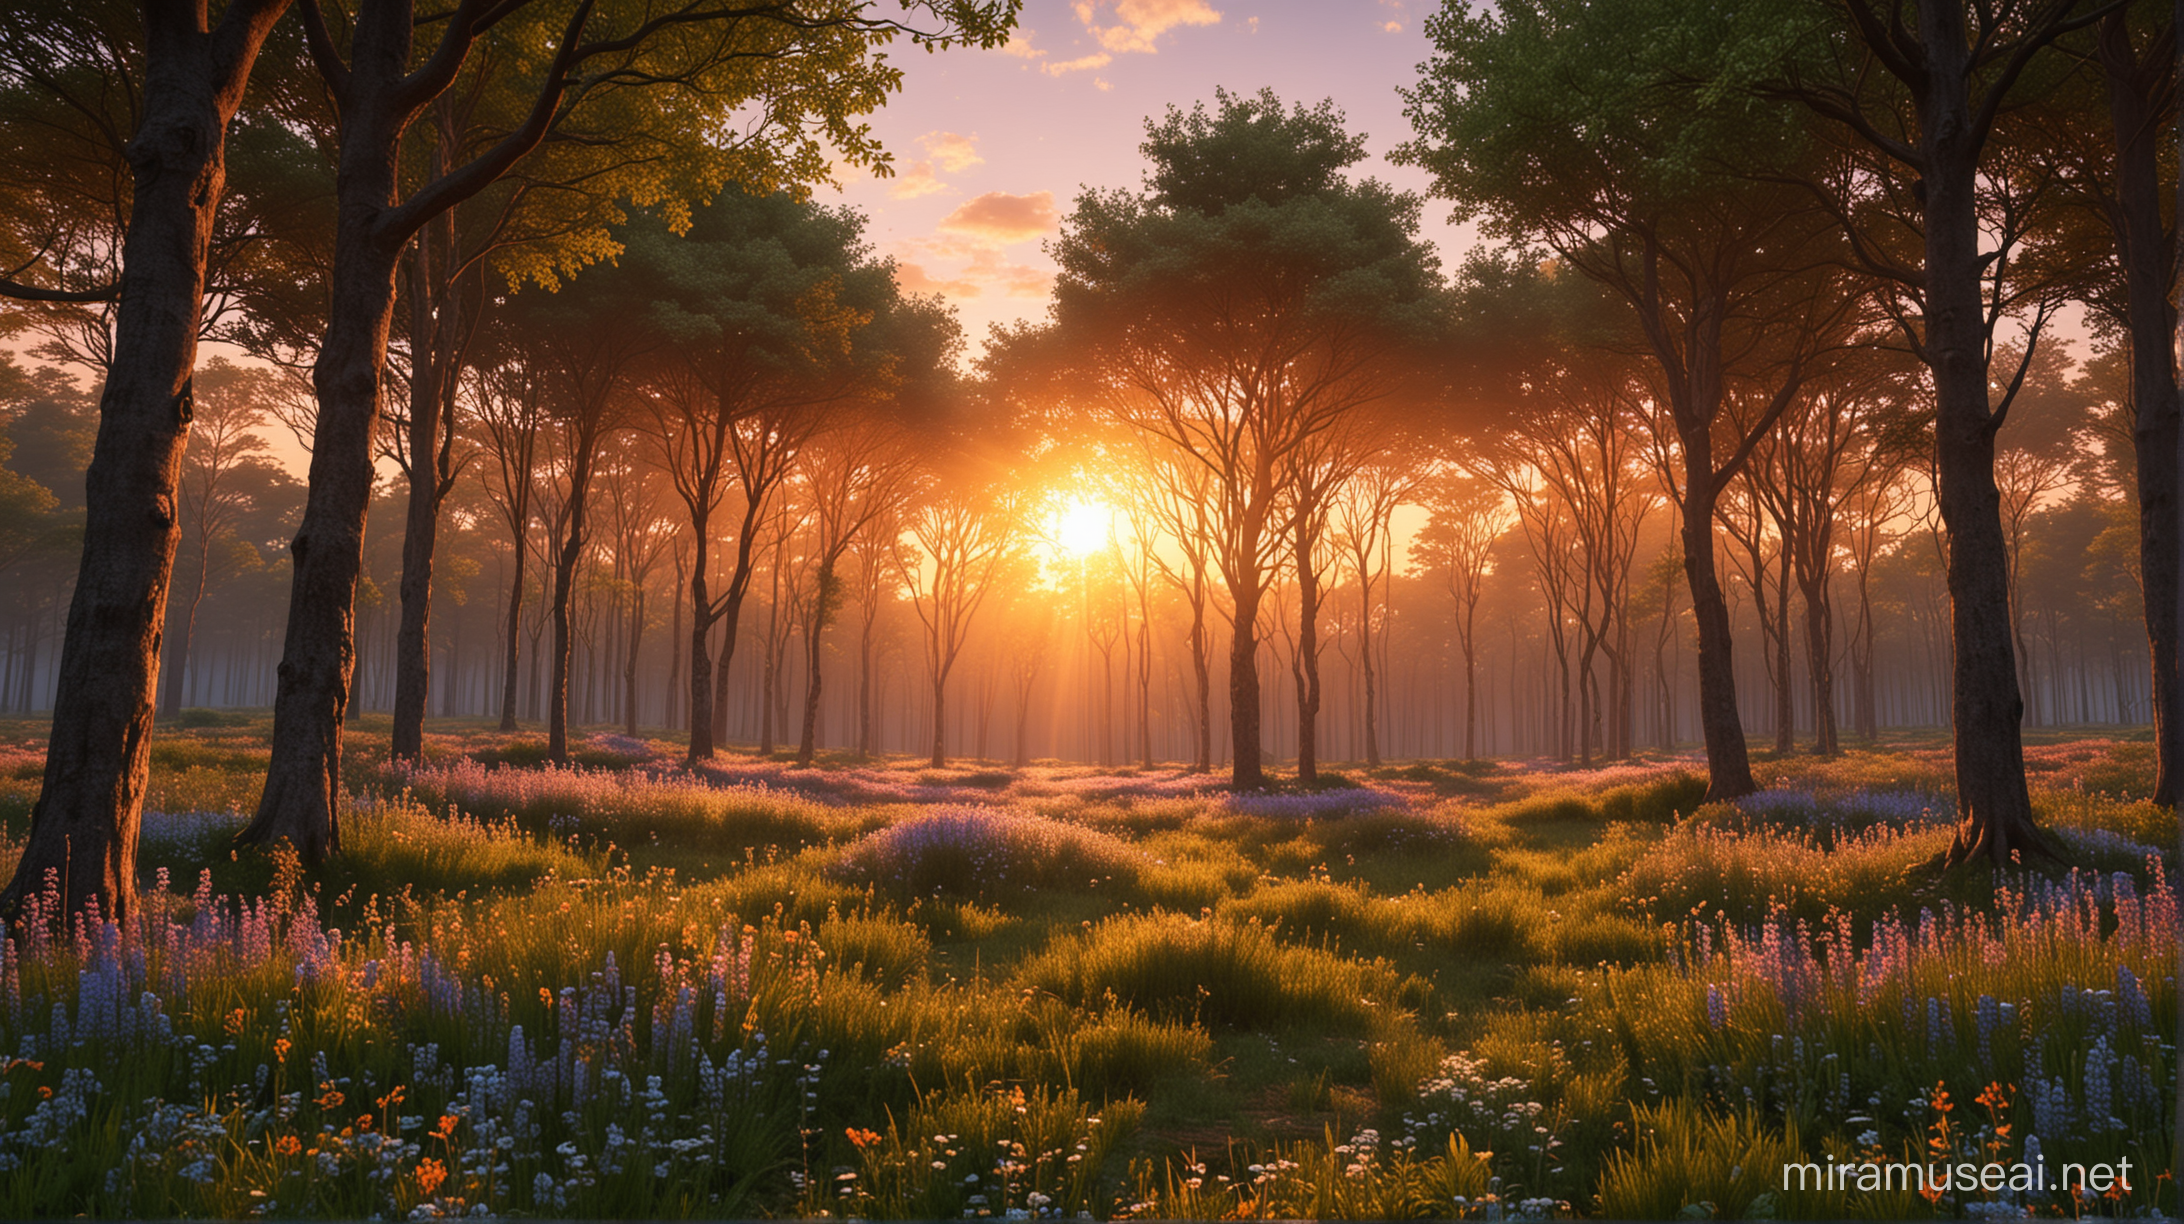 forest with flowers, trees, tree in the middle and sunset background